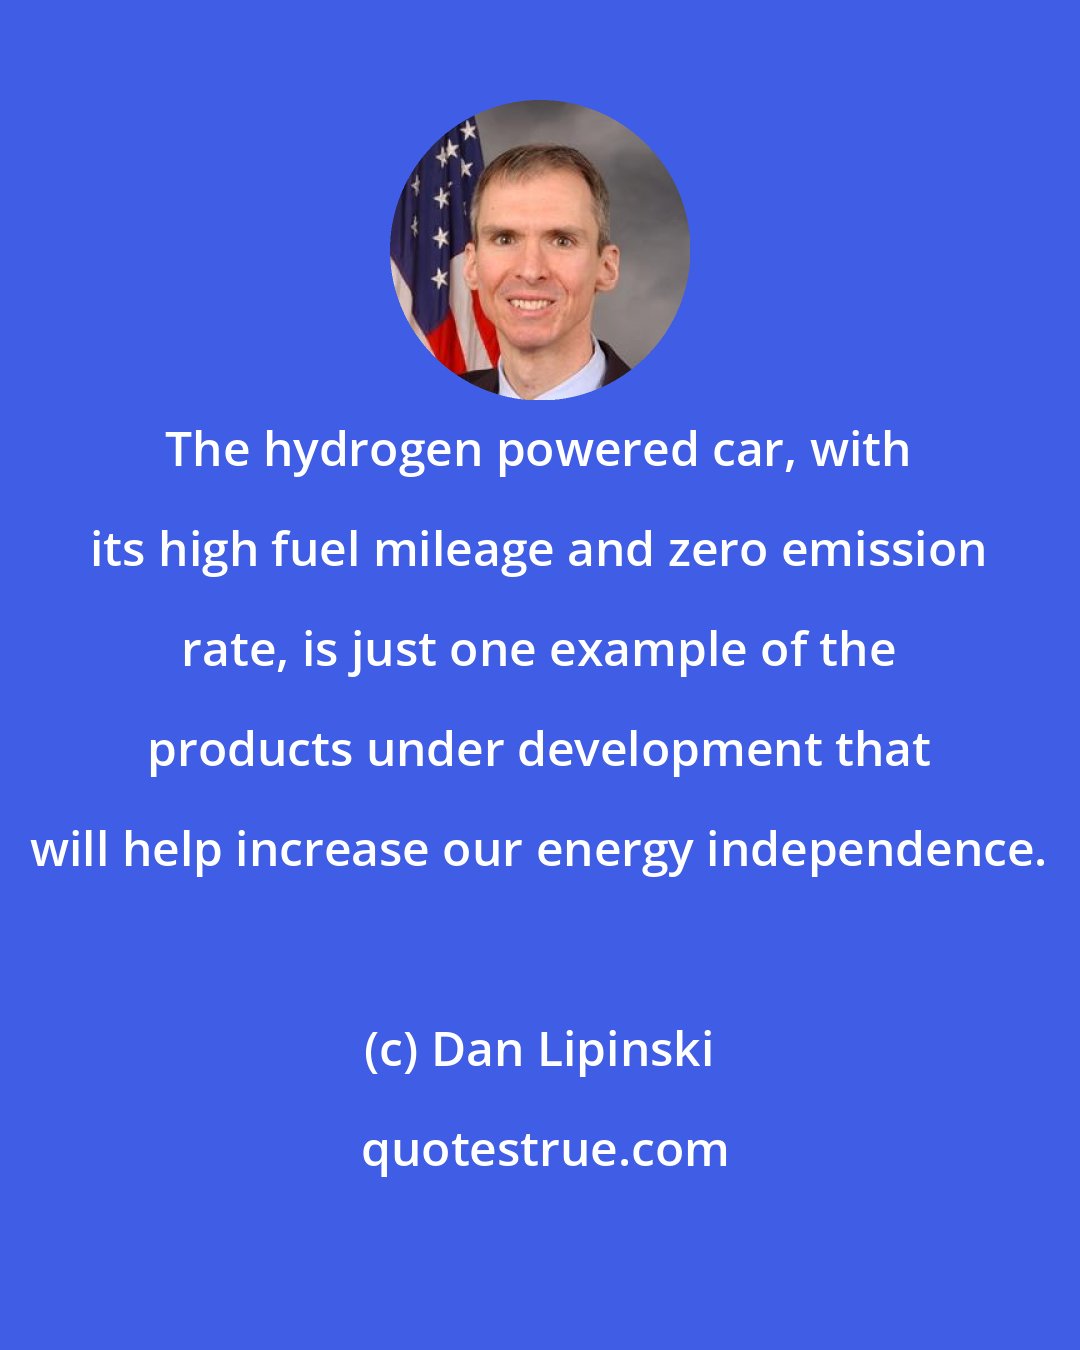 Dan Lipinski: The hydrogen powered car, with its high fuel mileage and zero emission rate, is just one example of the products under development that will help increase our energy independence.